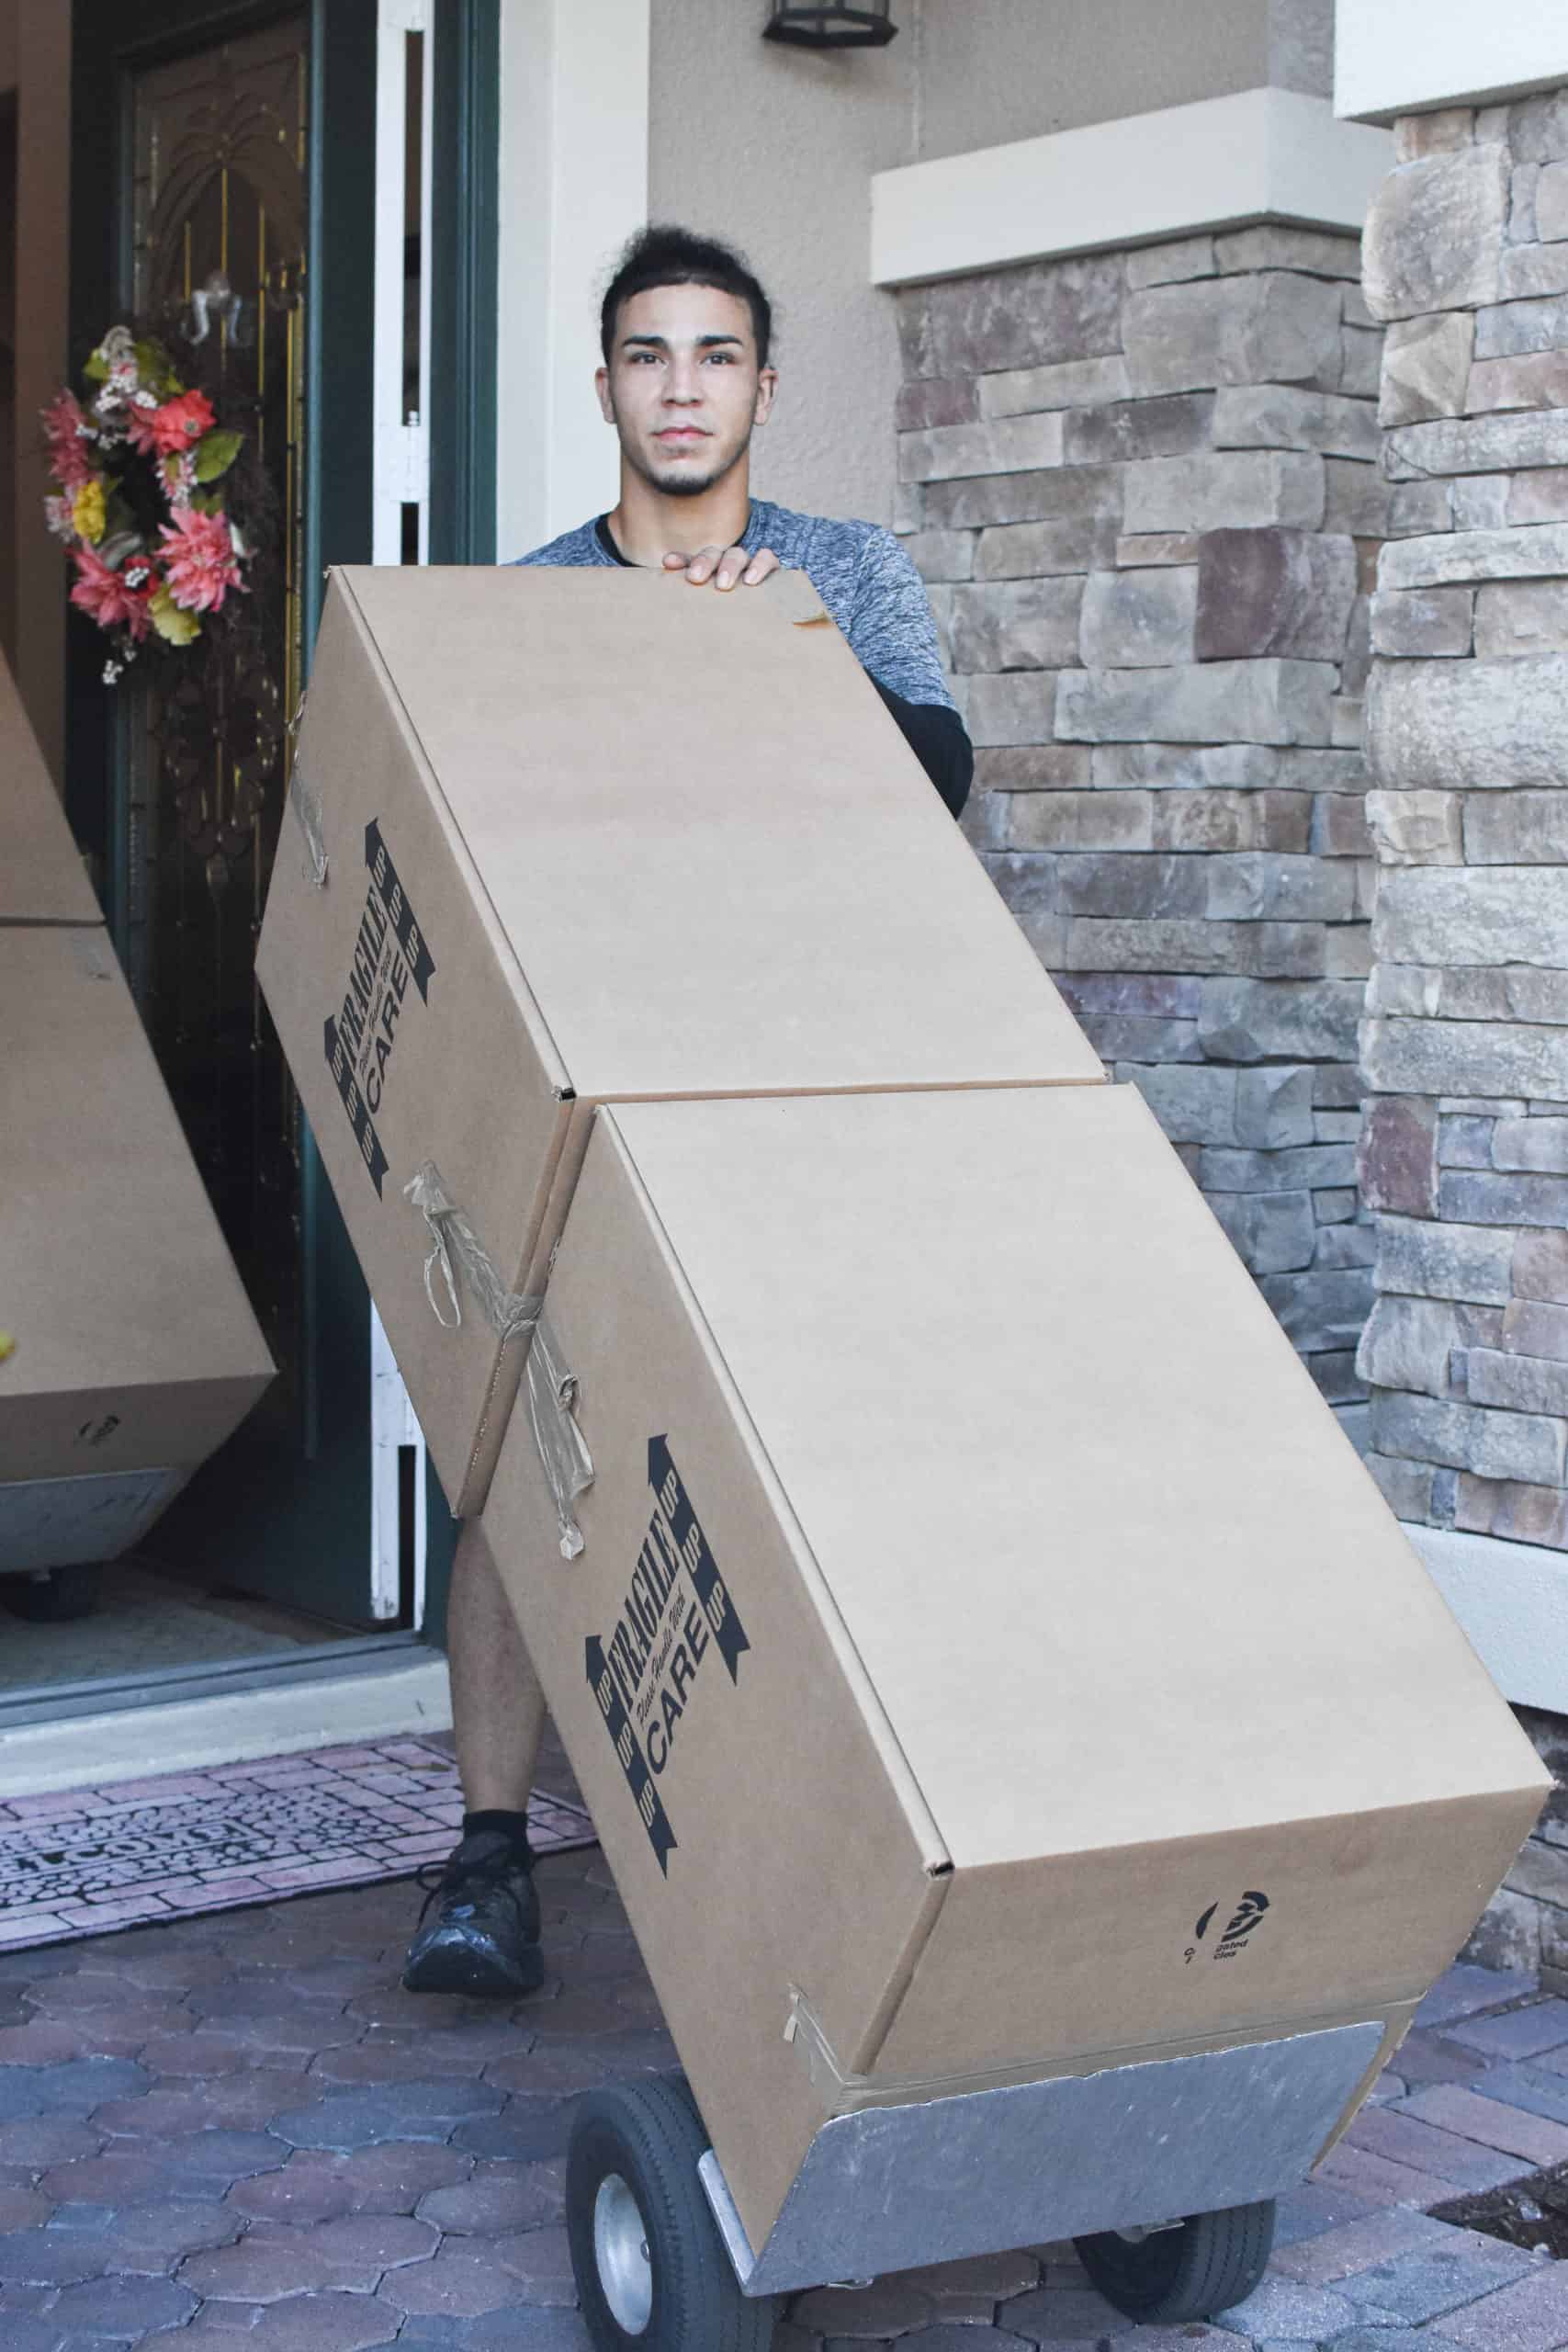 This is an image of a Teleport Moving employee with boxes on a dolley.